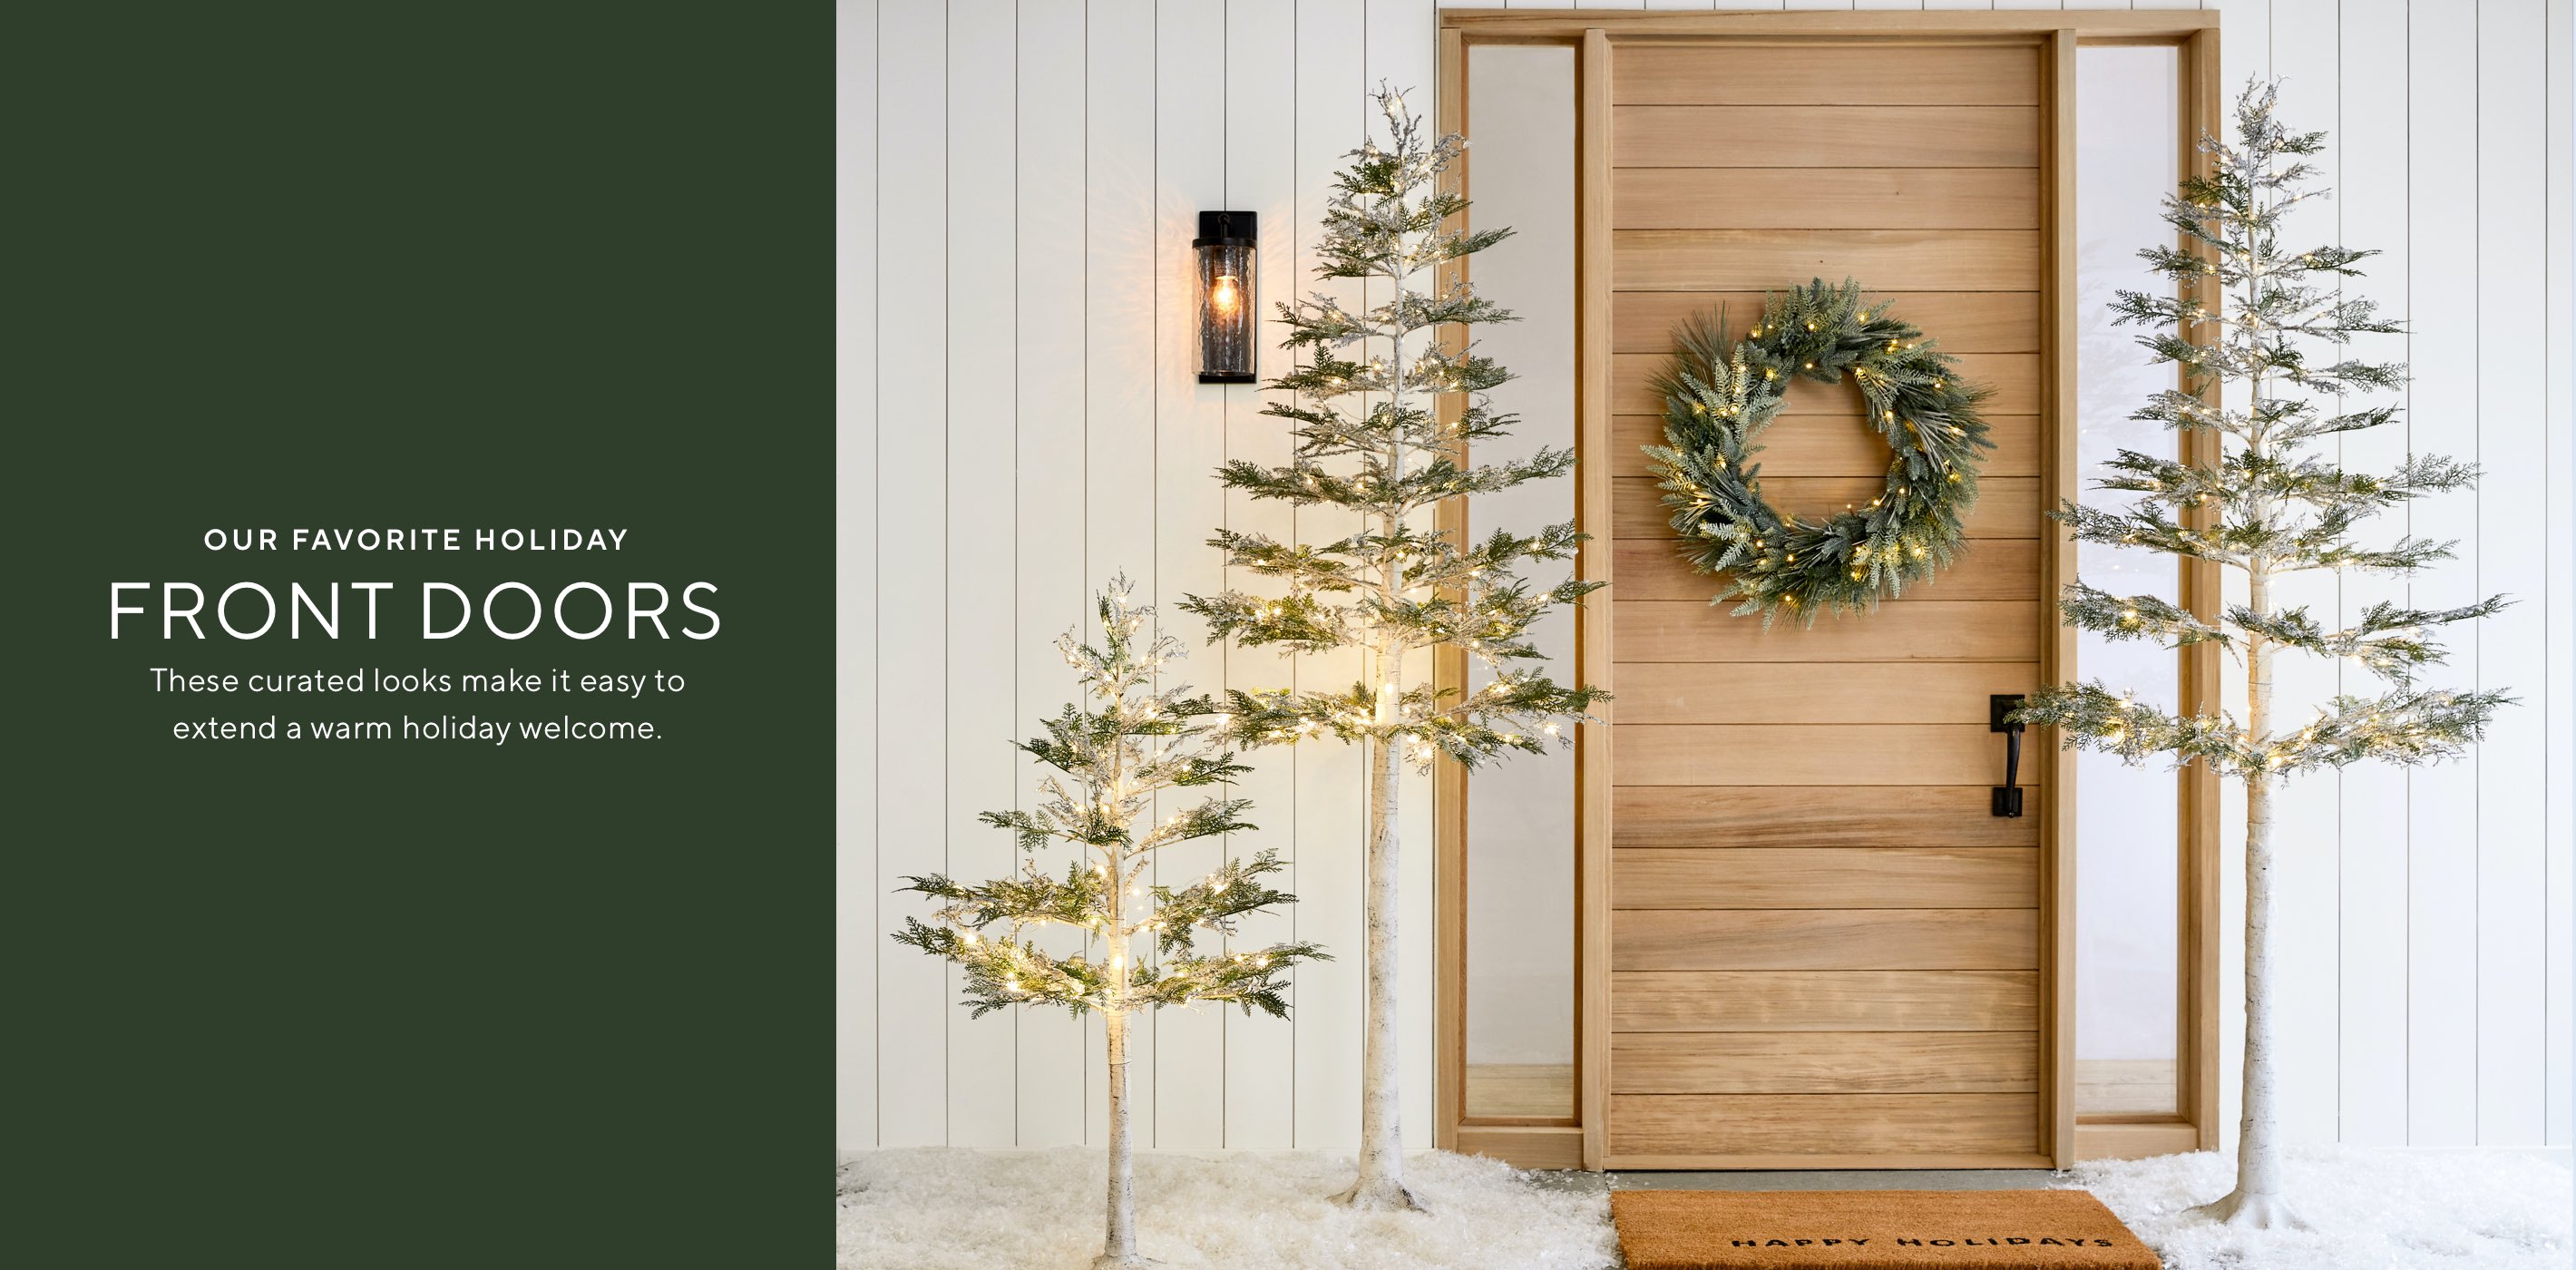 Our Favorite Holiday Front Doors